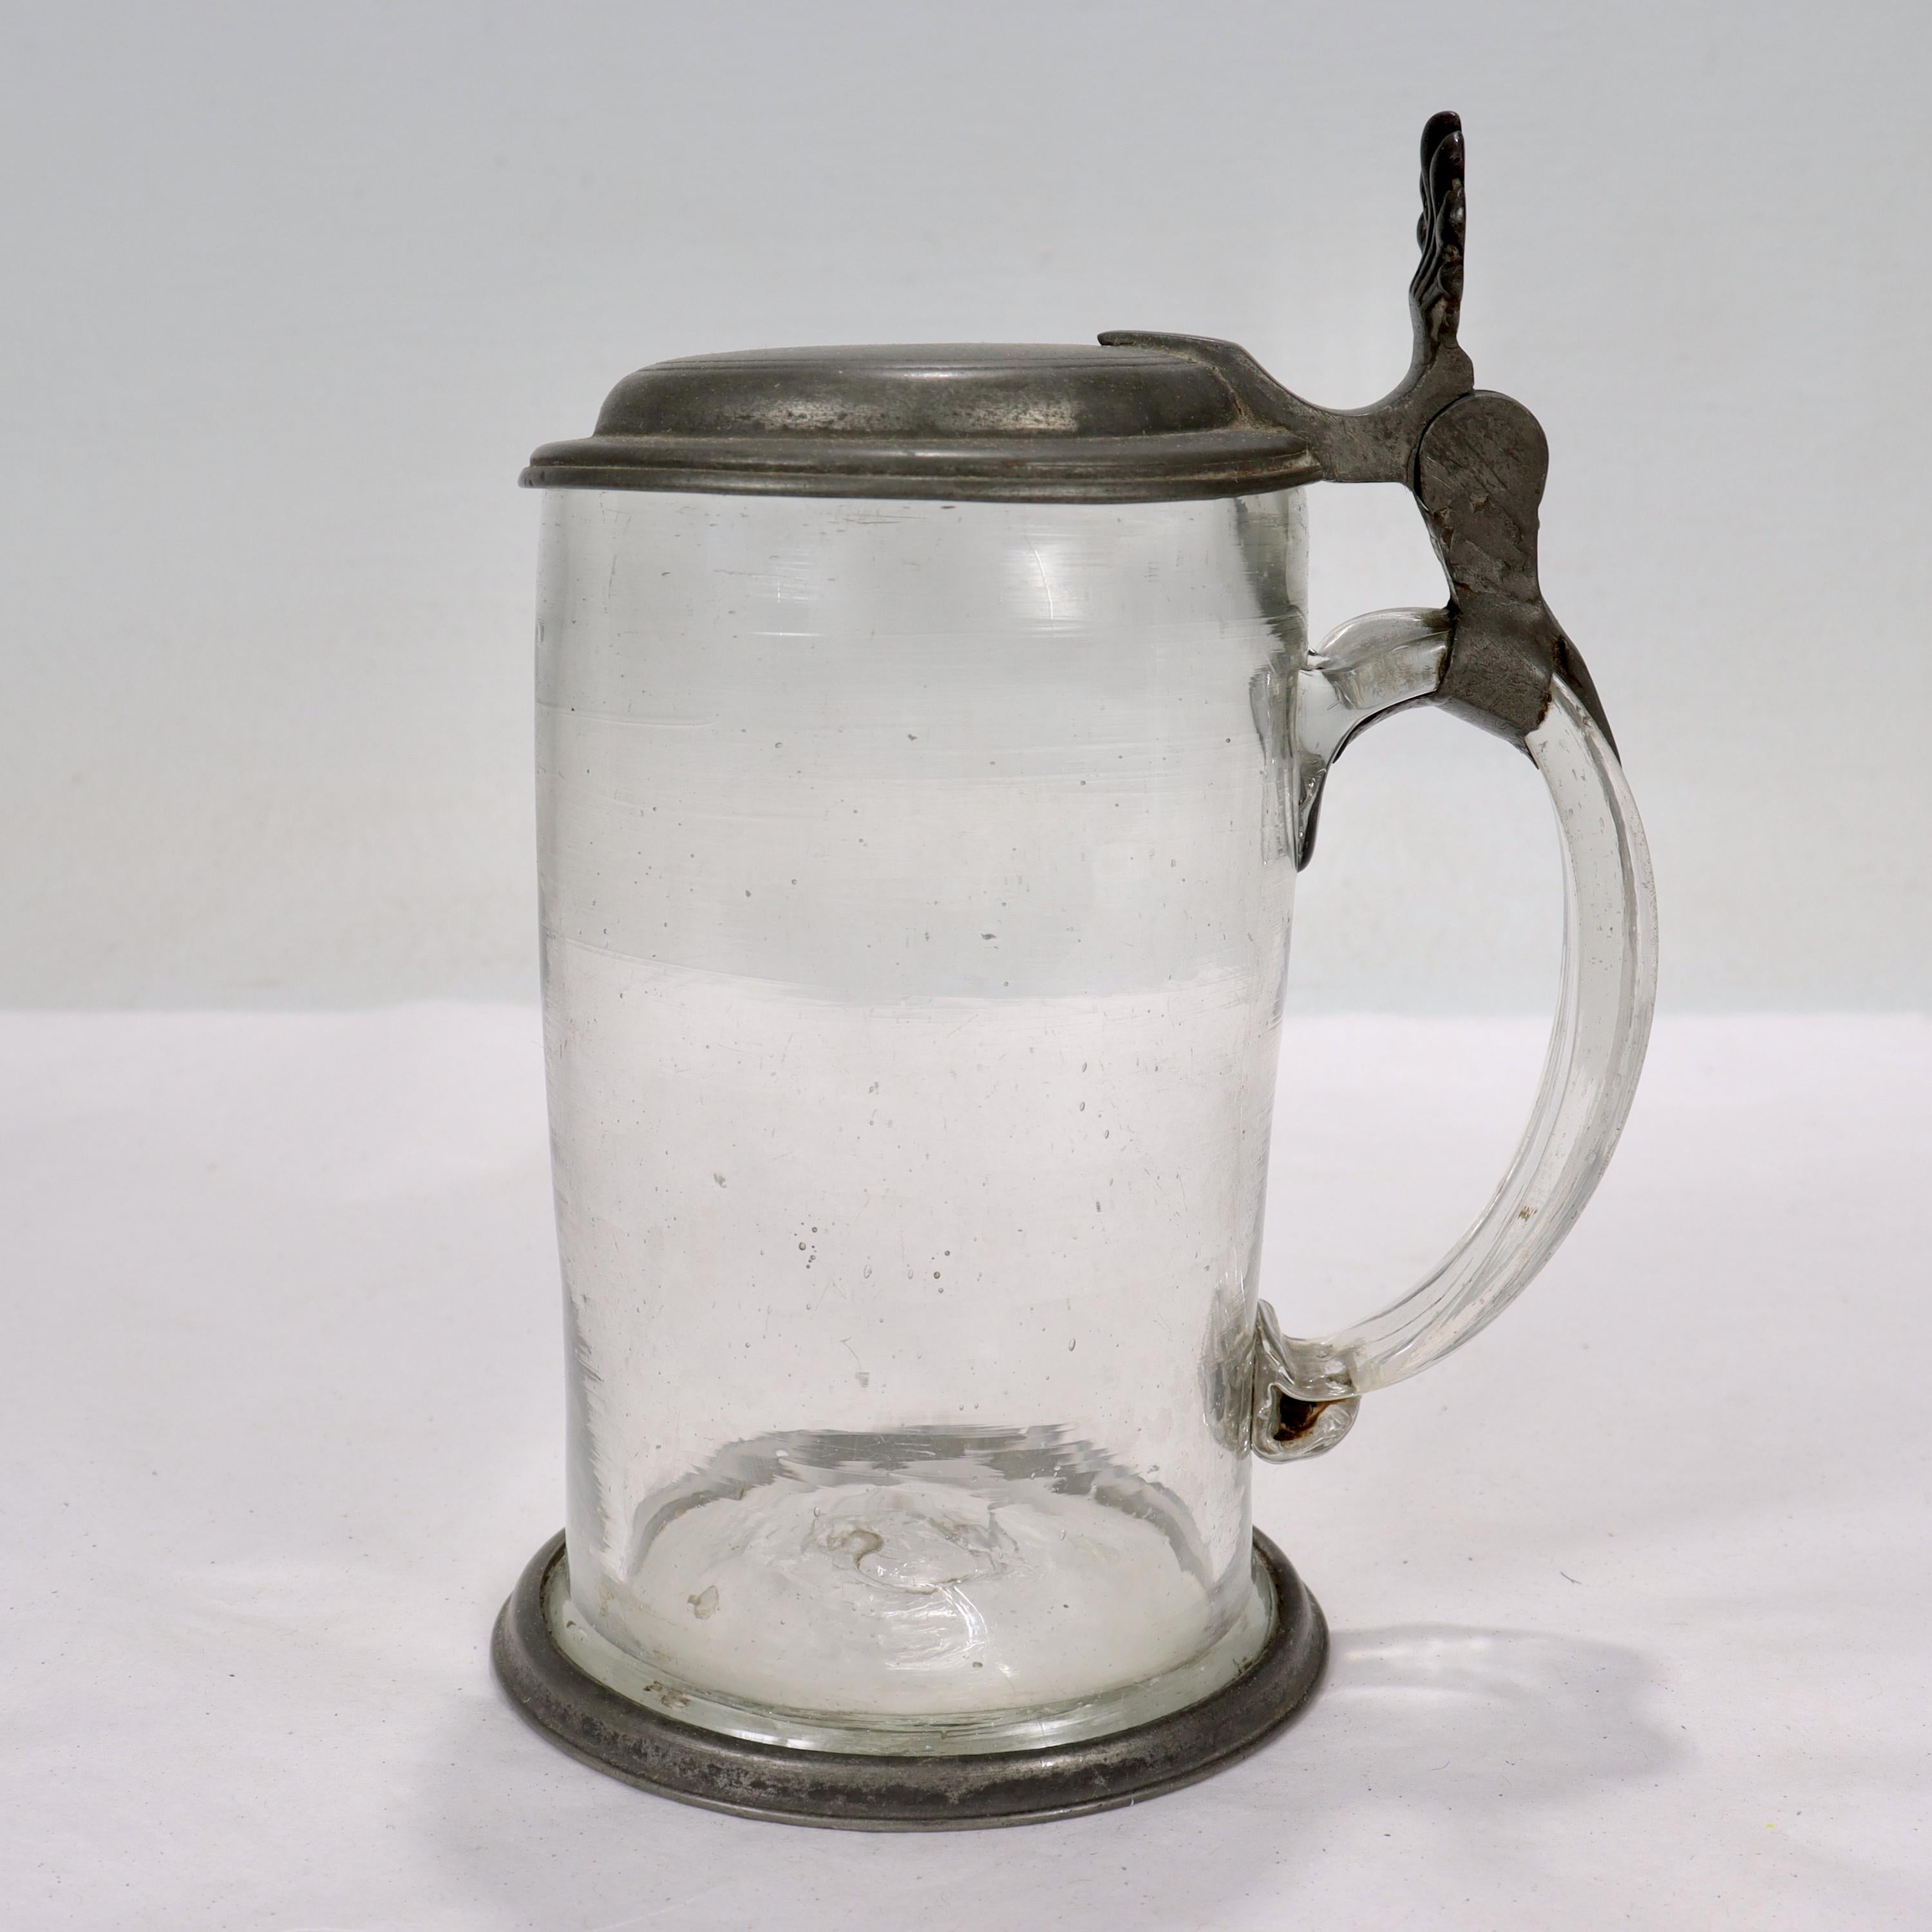 A fine antique 18th century pewter & glass beer stein.

In the form of a glass stein mounted with a pewter lid and pewter foot rim. 

Monogrammed to the lid for 